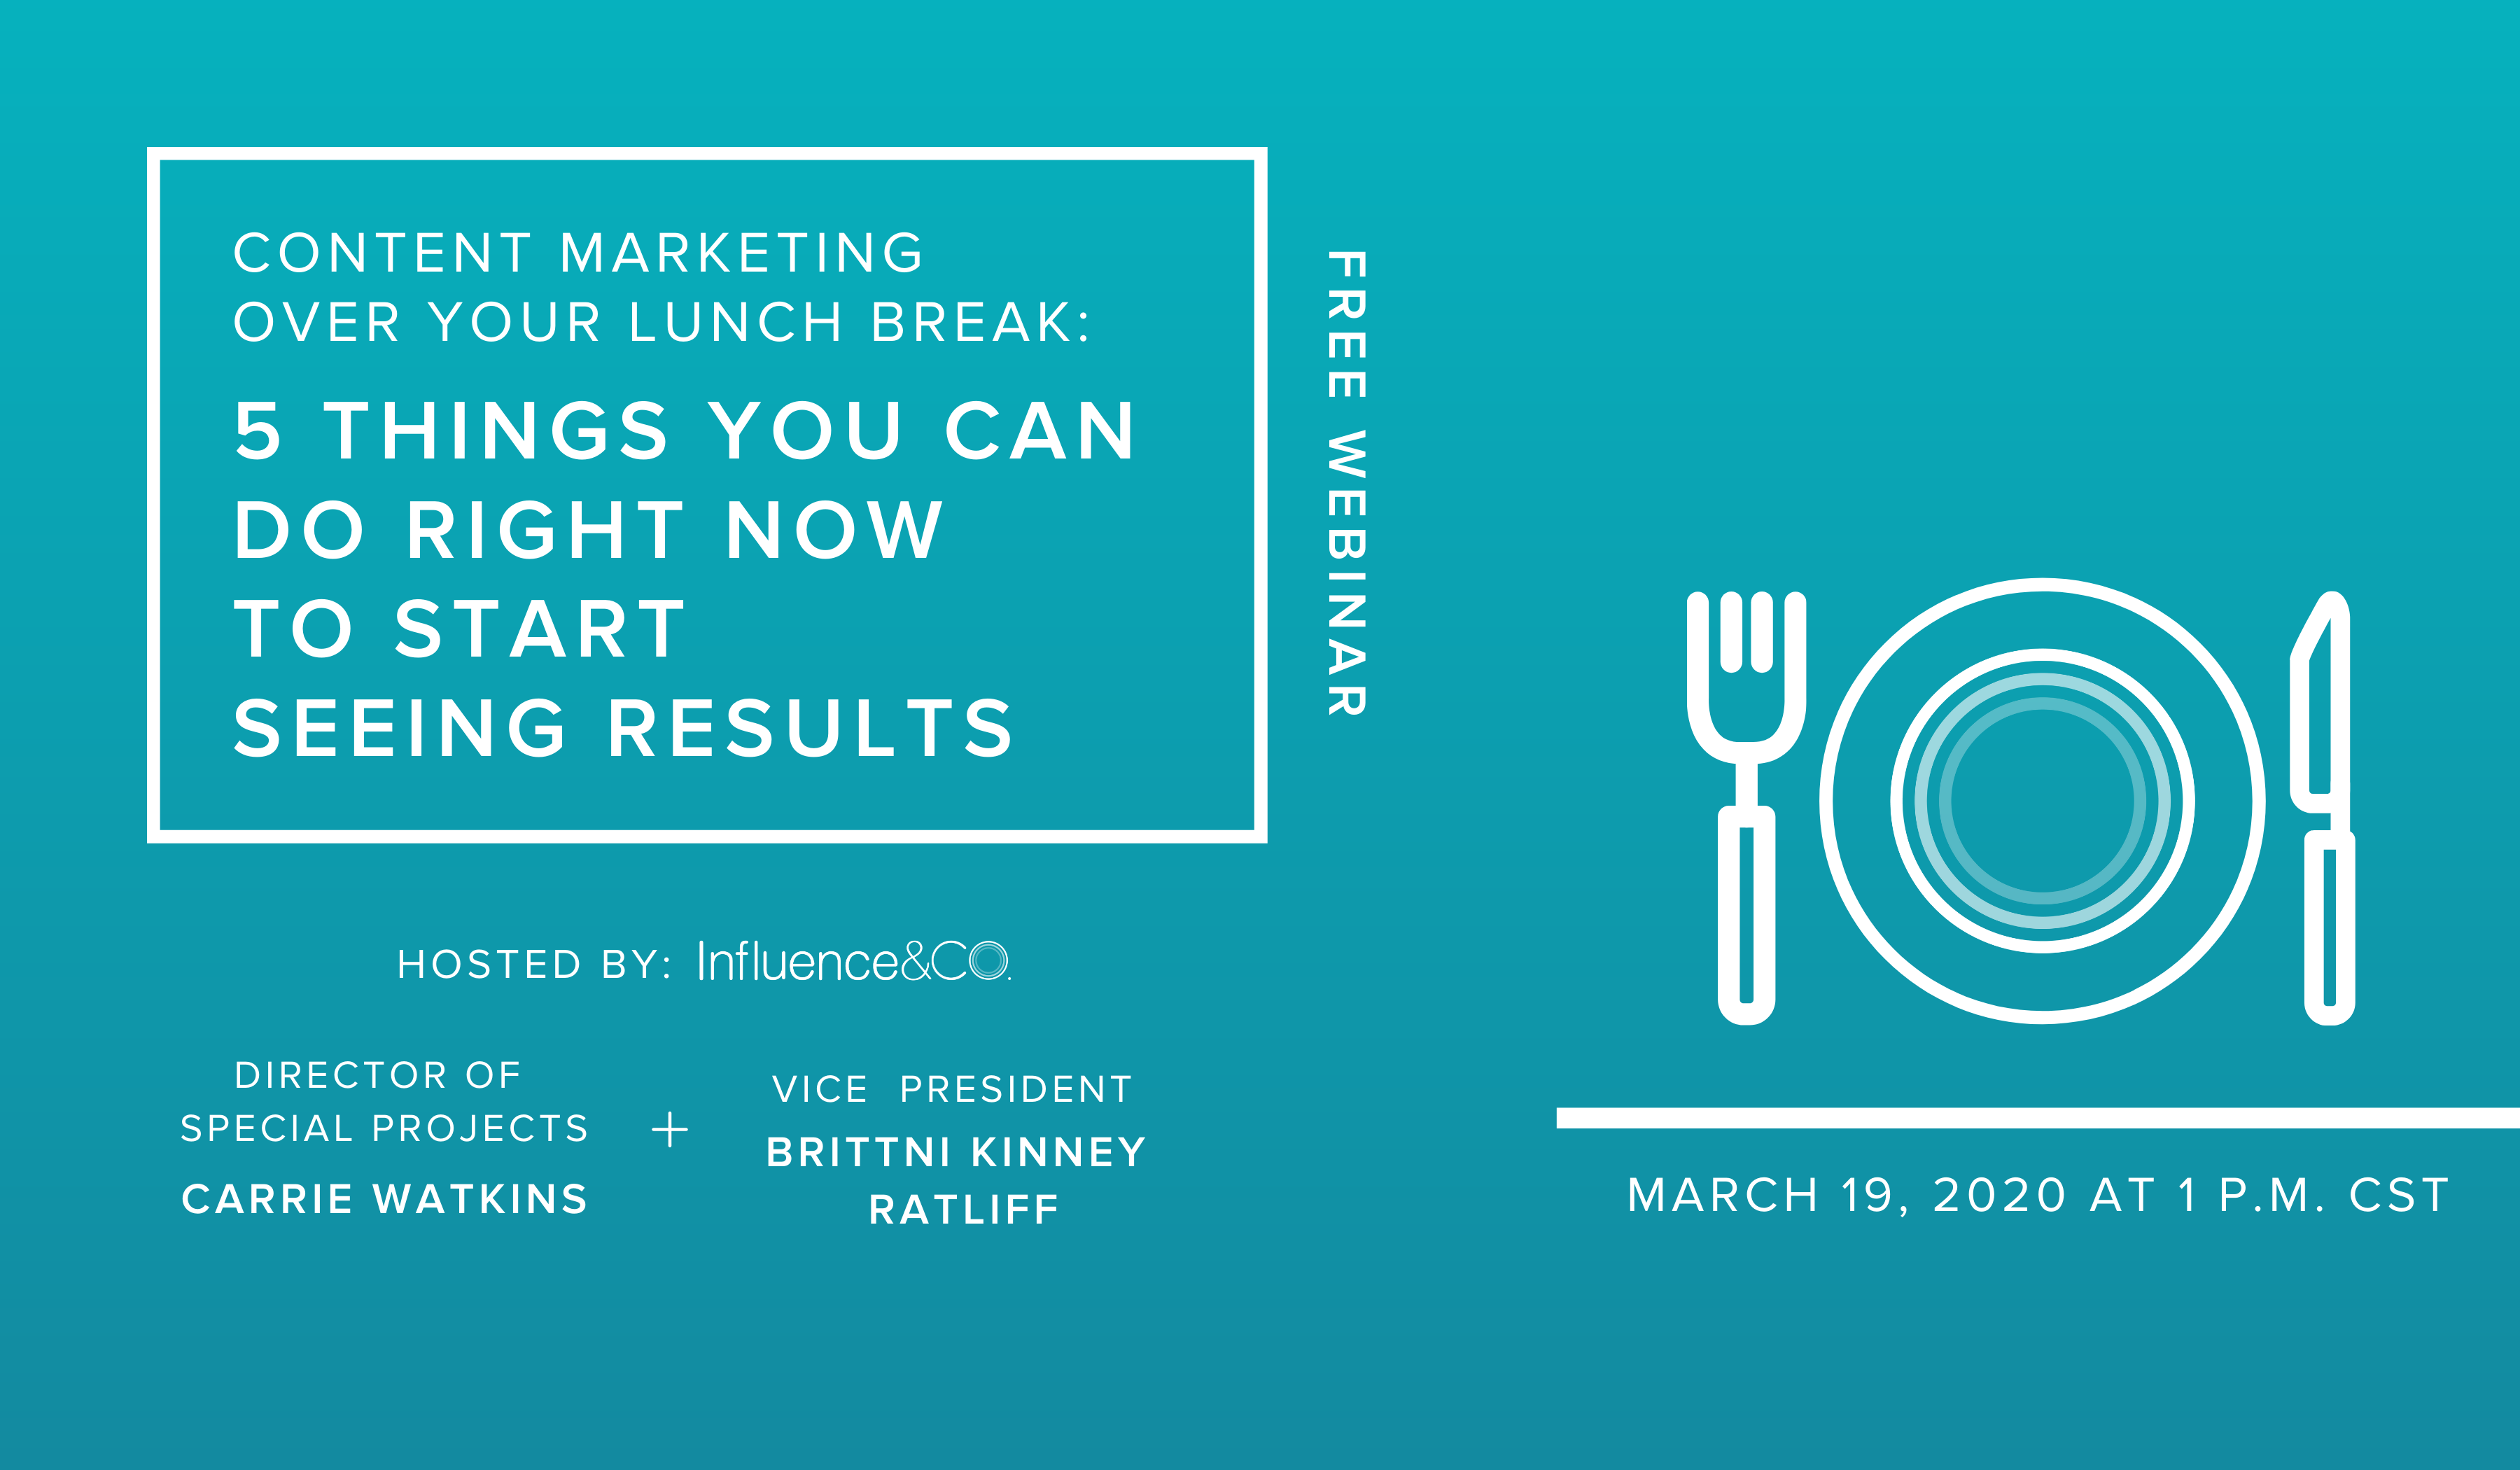 Content Marketing Over Your Lunch Break: 5 Things You Can Do Right Now to Start Seeing Results. Illustration of the Influence & Co. logo on a plate, and a fork and knife on either side of the plate.